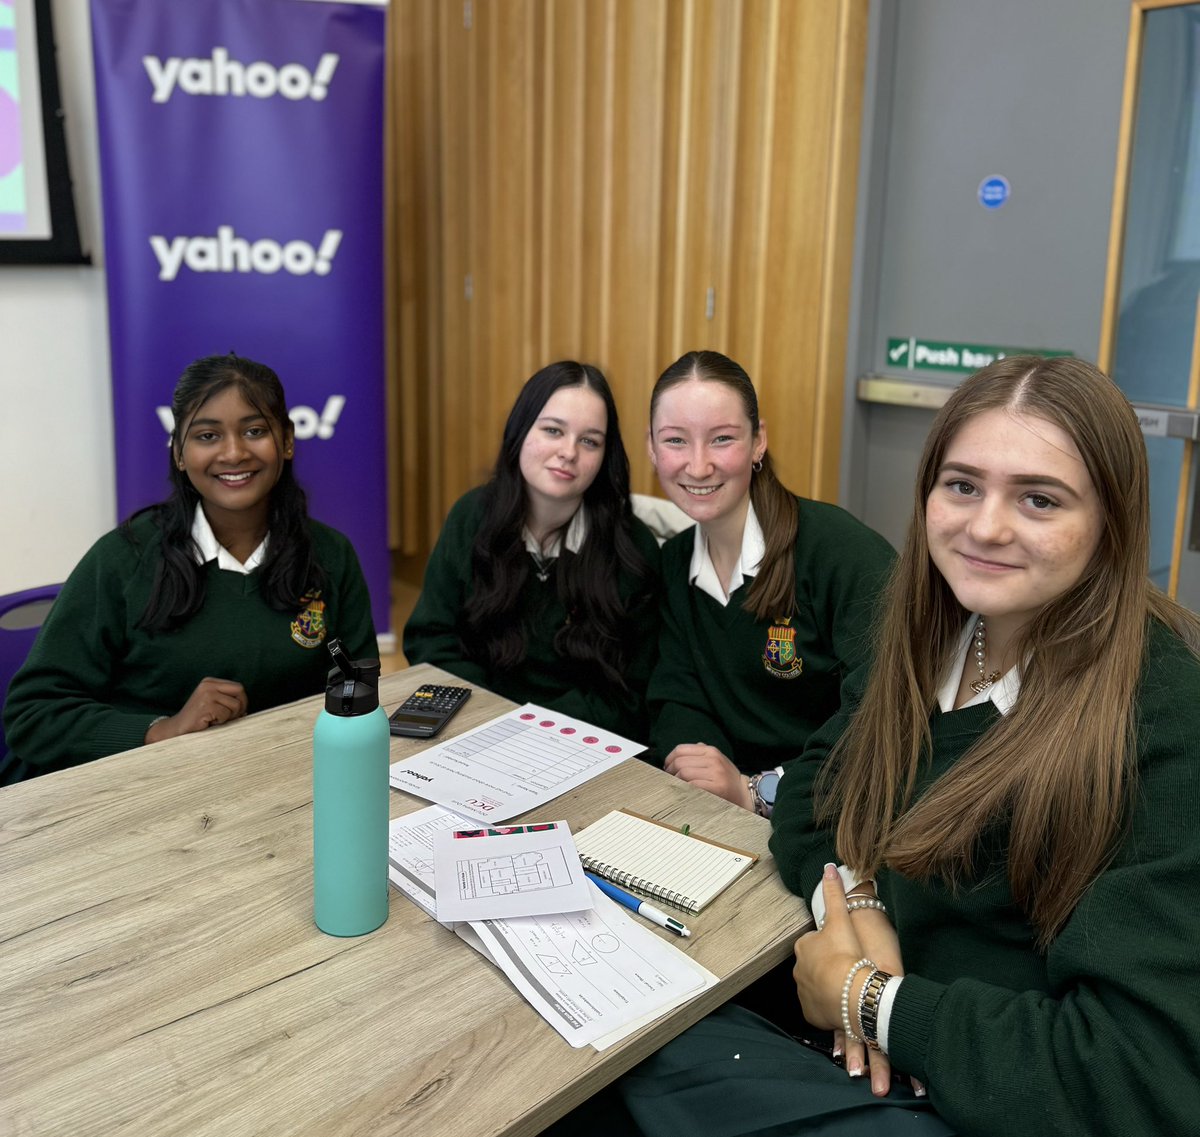 Thank you to the over 100 students for joining our Maths Quiz today! 🎉 It was a massive success, and a huge thank you to @Yahoo for their generous support! #dublincityuniversity #dcuaccess